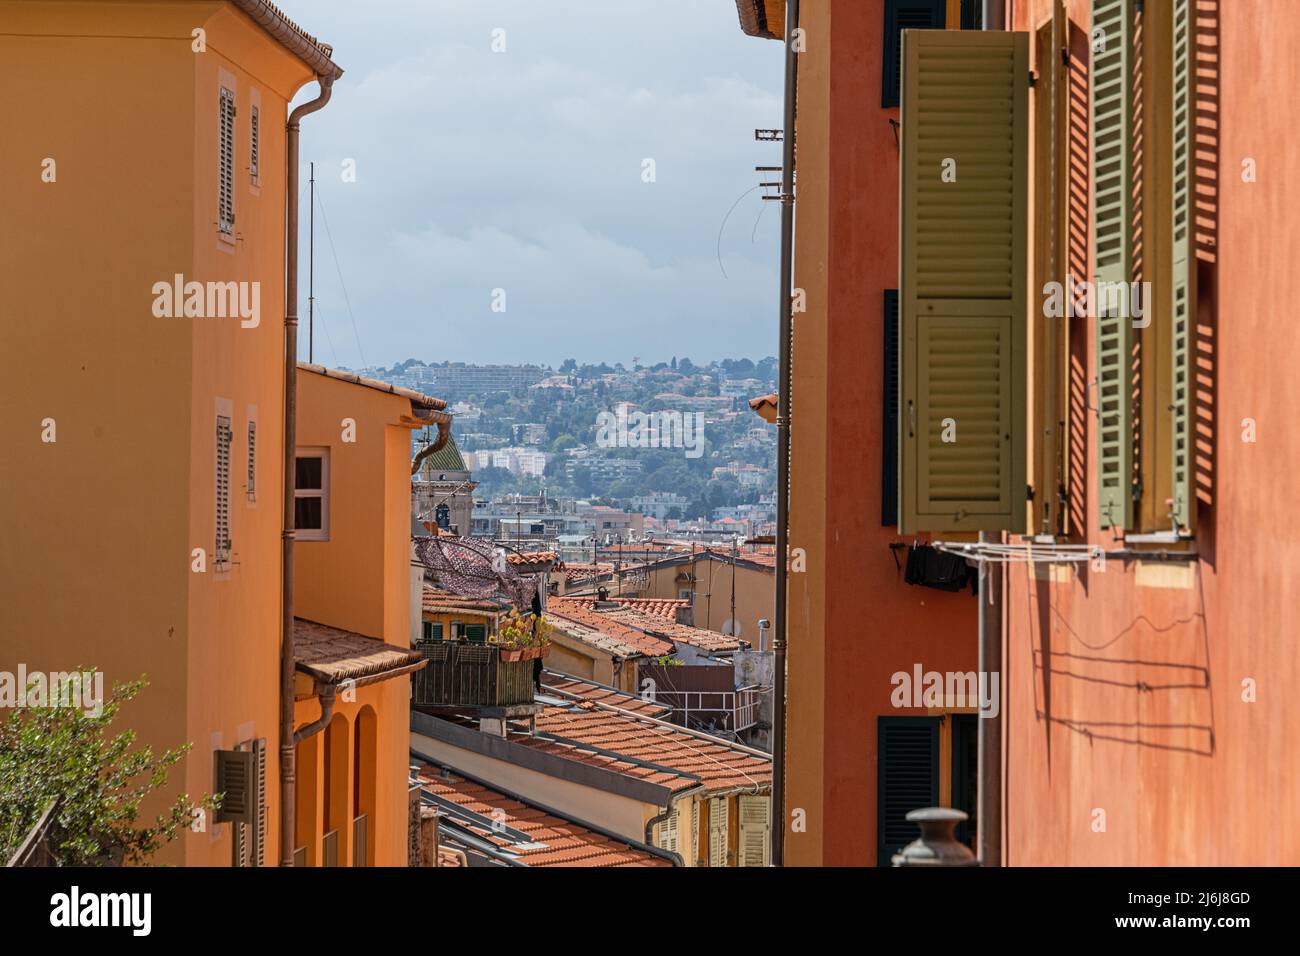 Elevated street view of Nice Old Town. Stock Photo